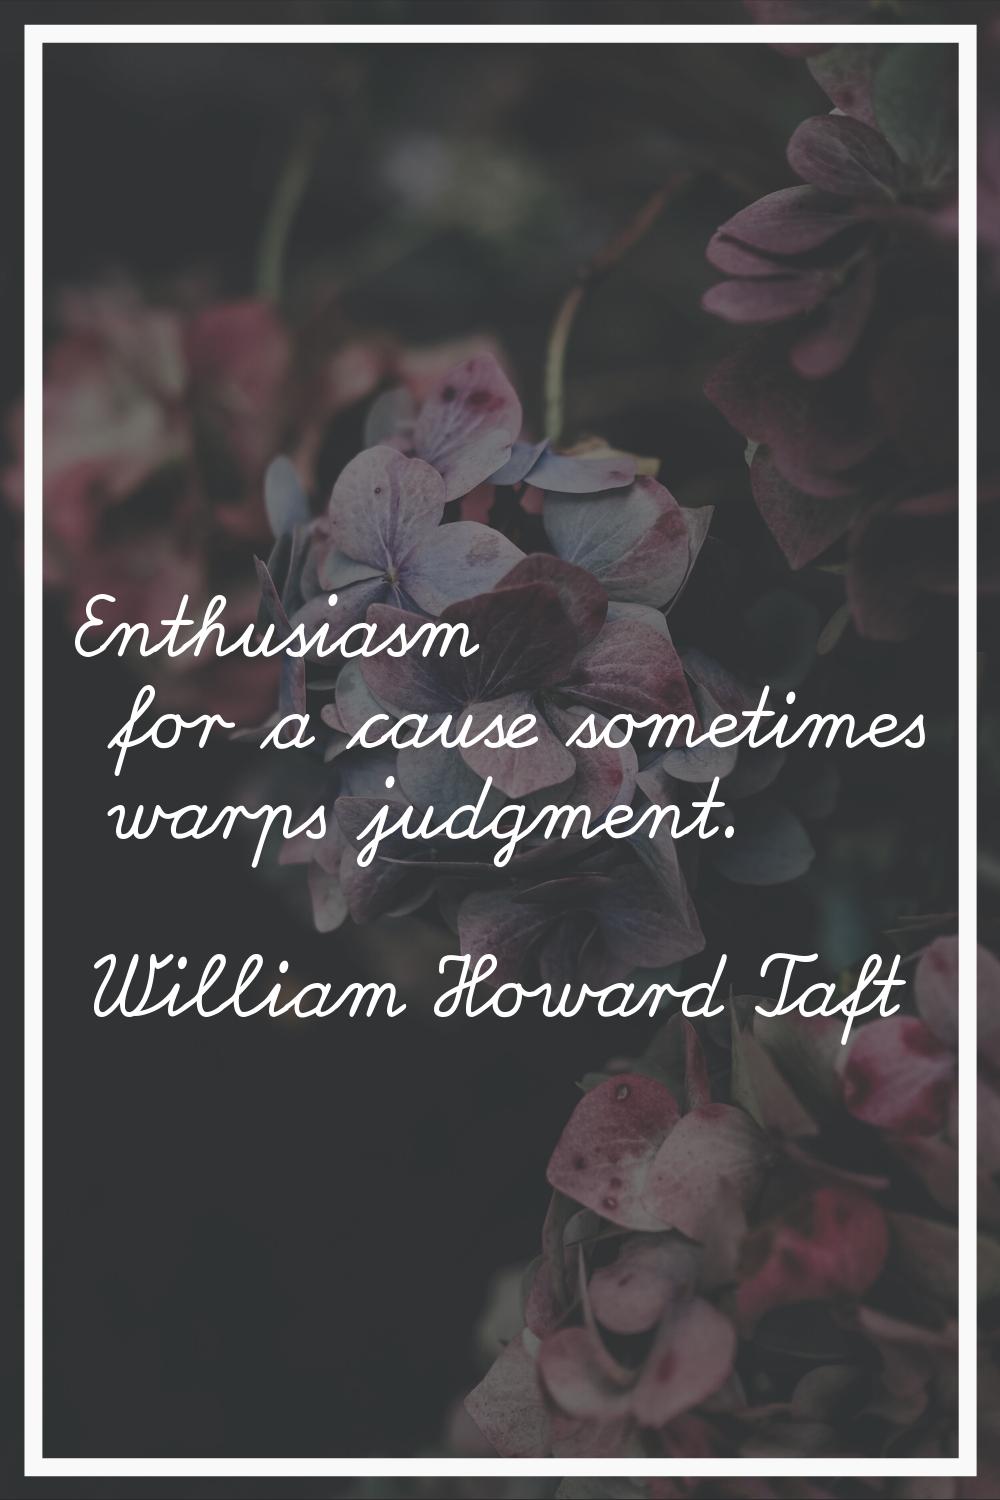 Enthusiasm for a cause sometimes warps judgment.